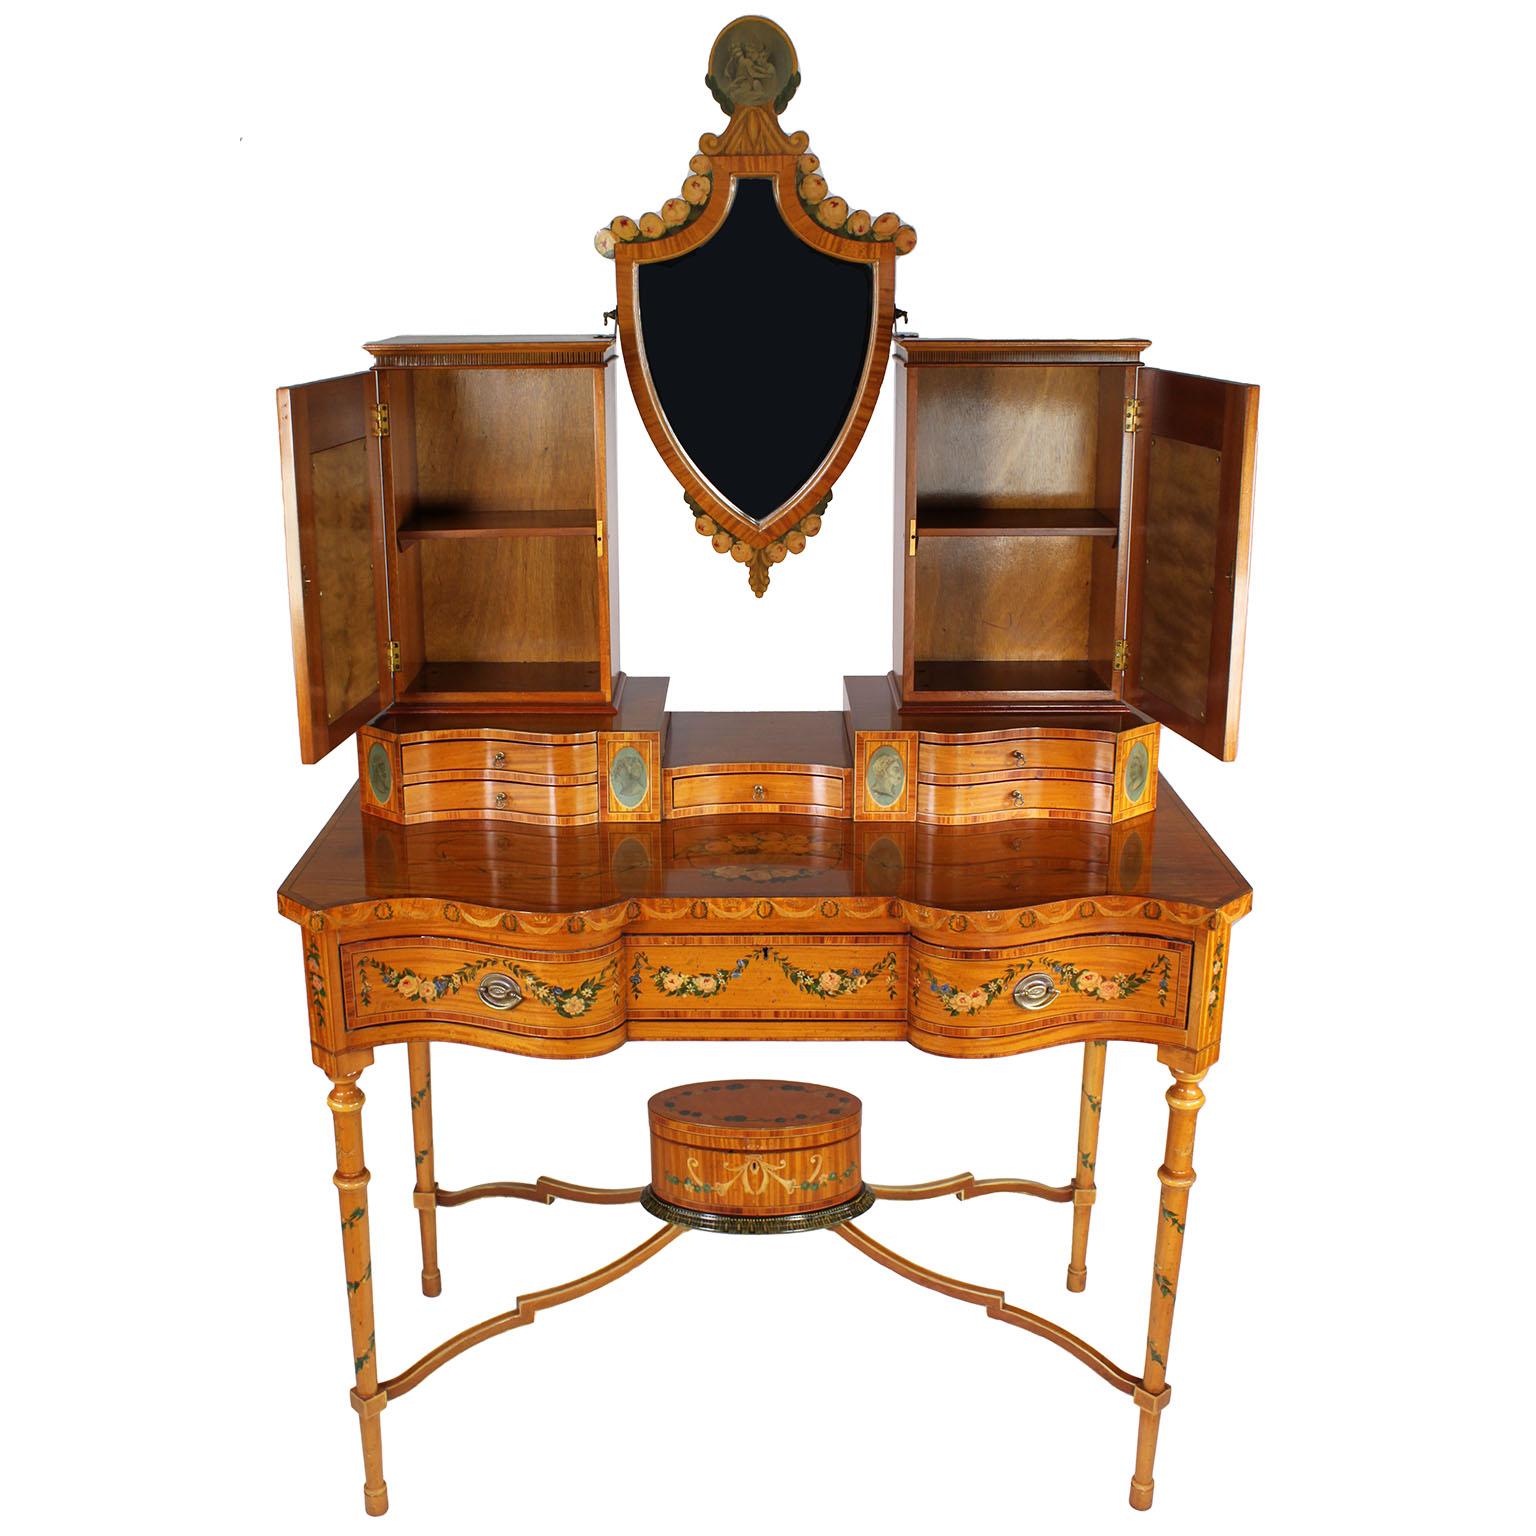 Fine English 19th Century Adam Style Polychrome Painted Satinwood Vanity Table For Sale 7